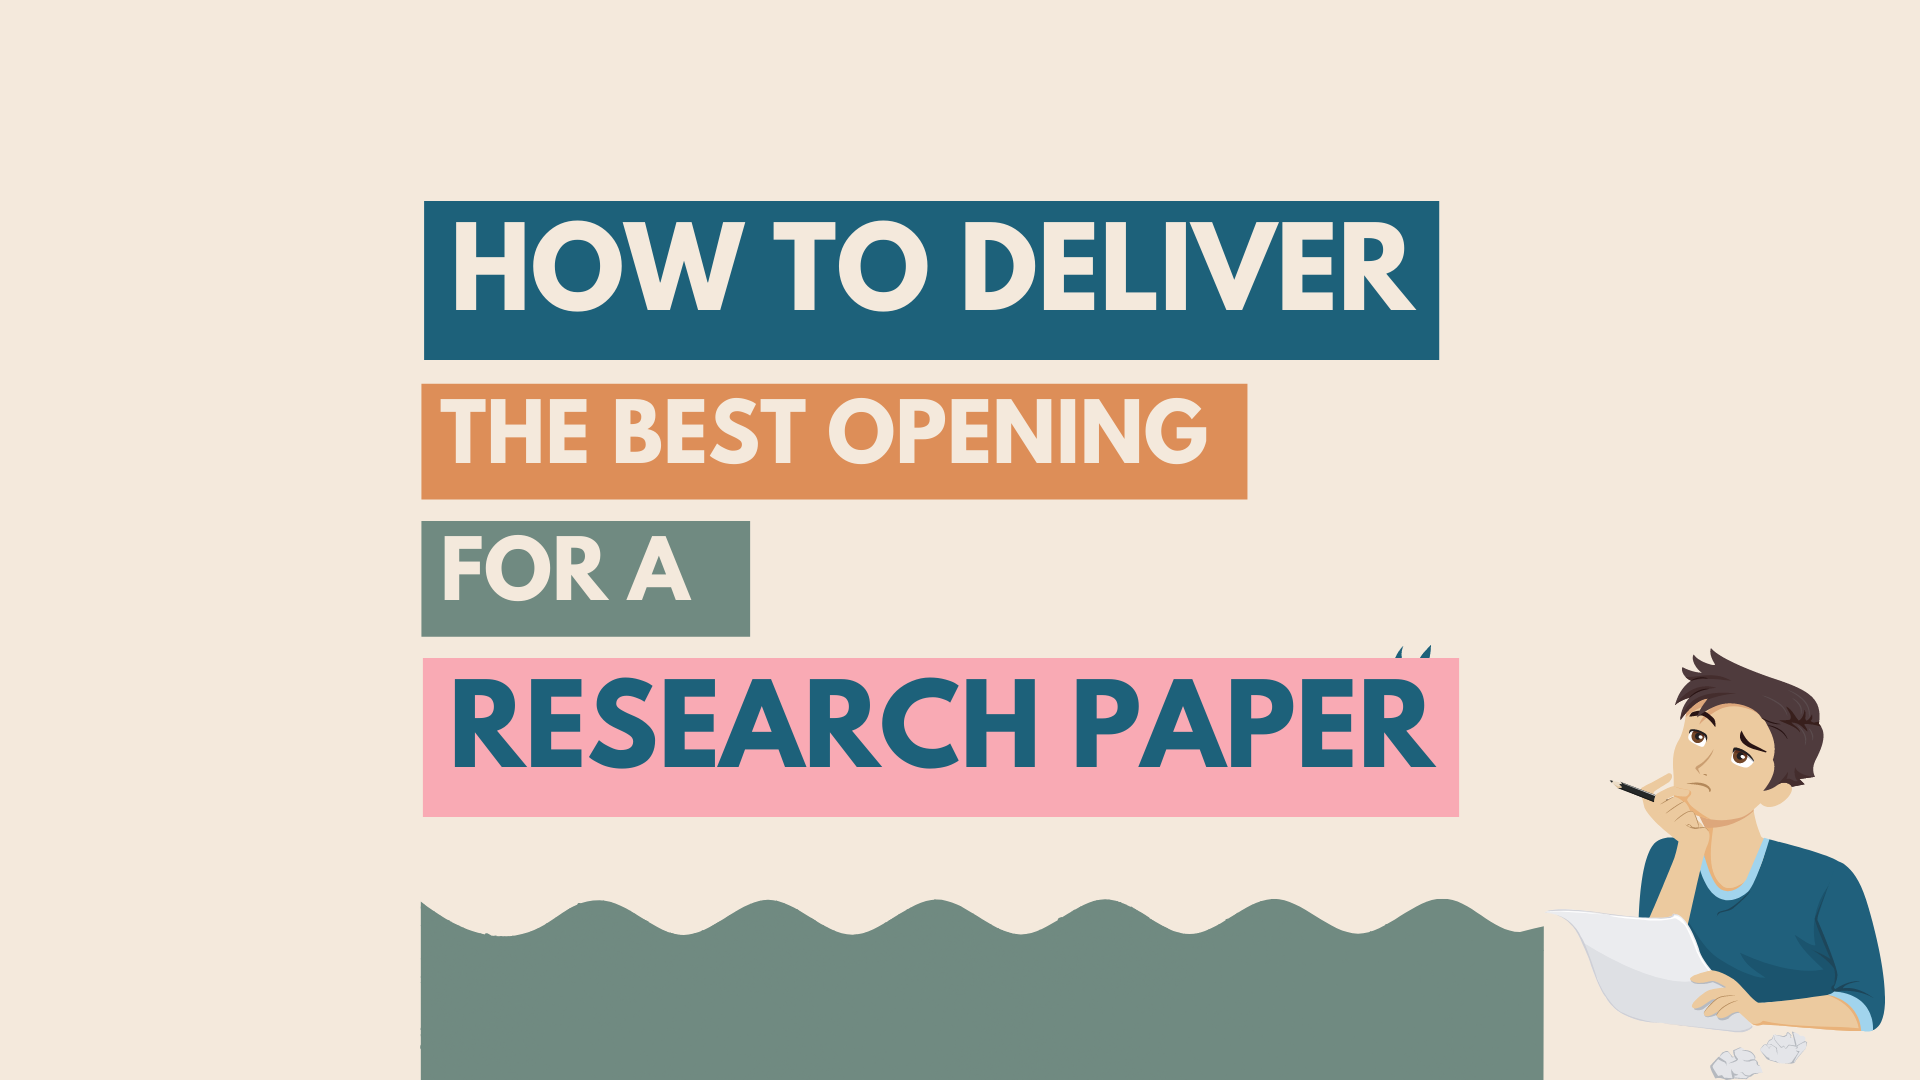 How to Deliver the Best Opening for a Research Paper